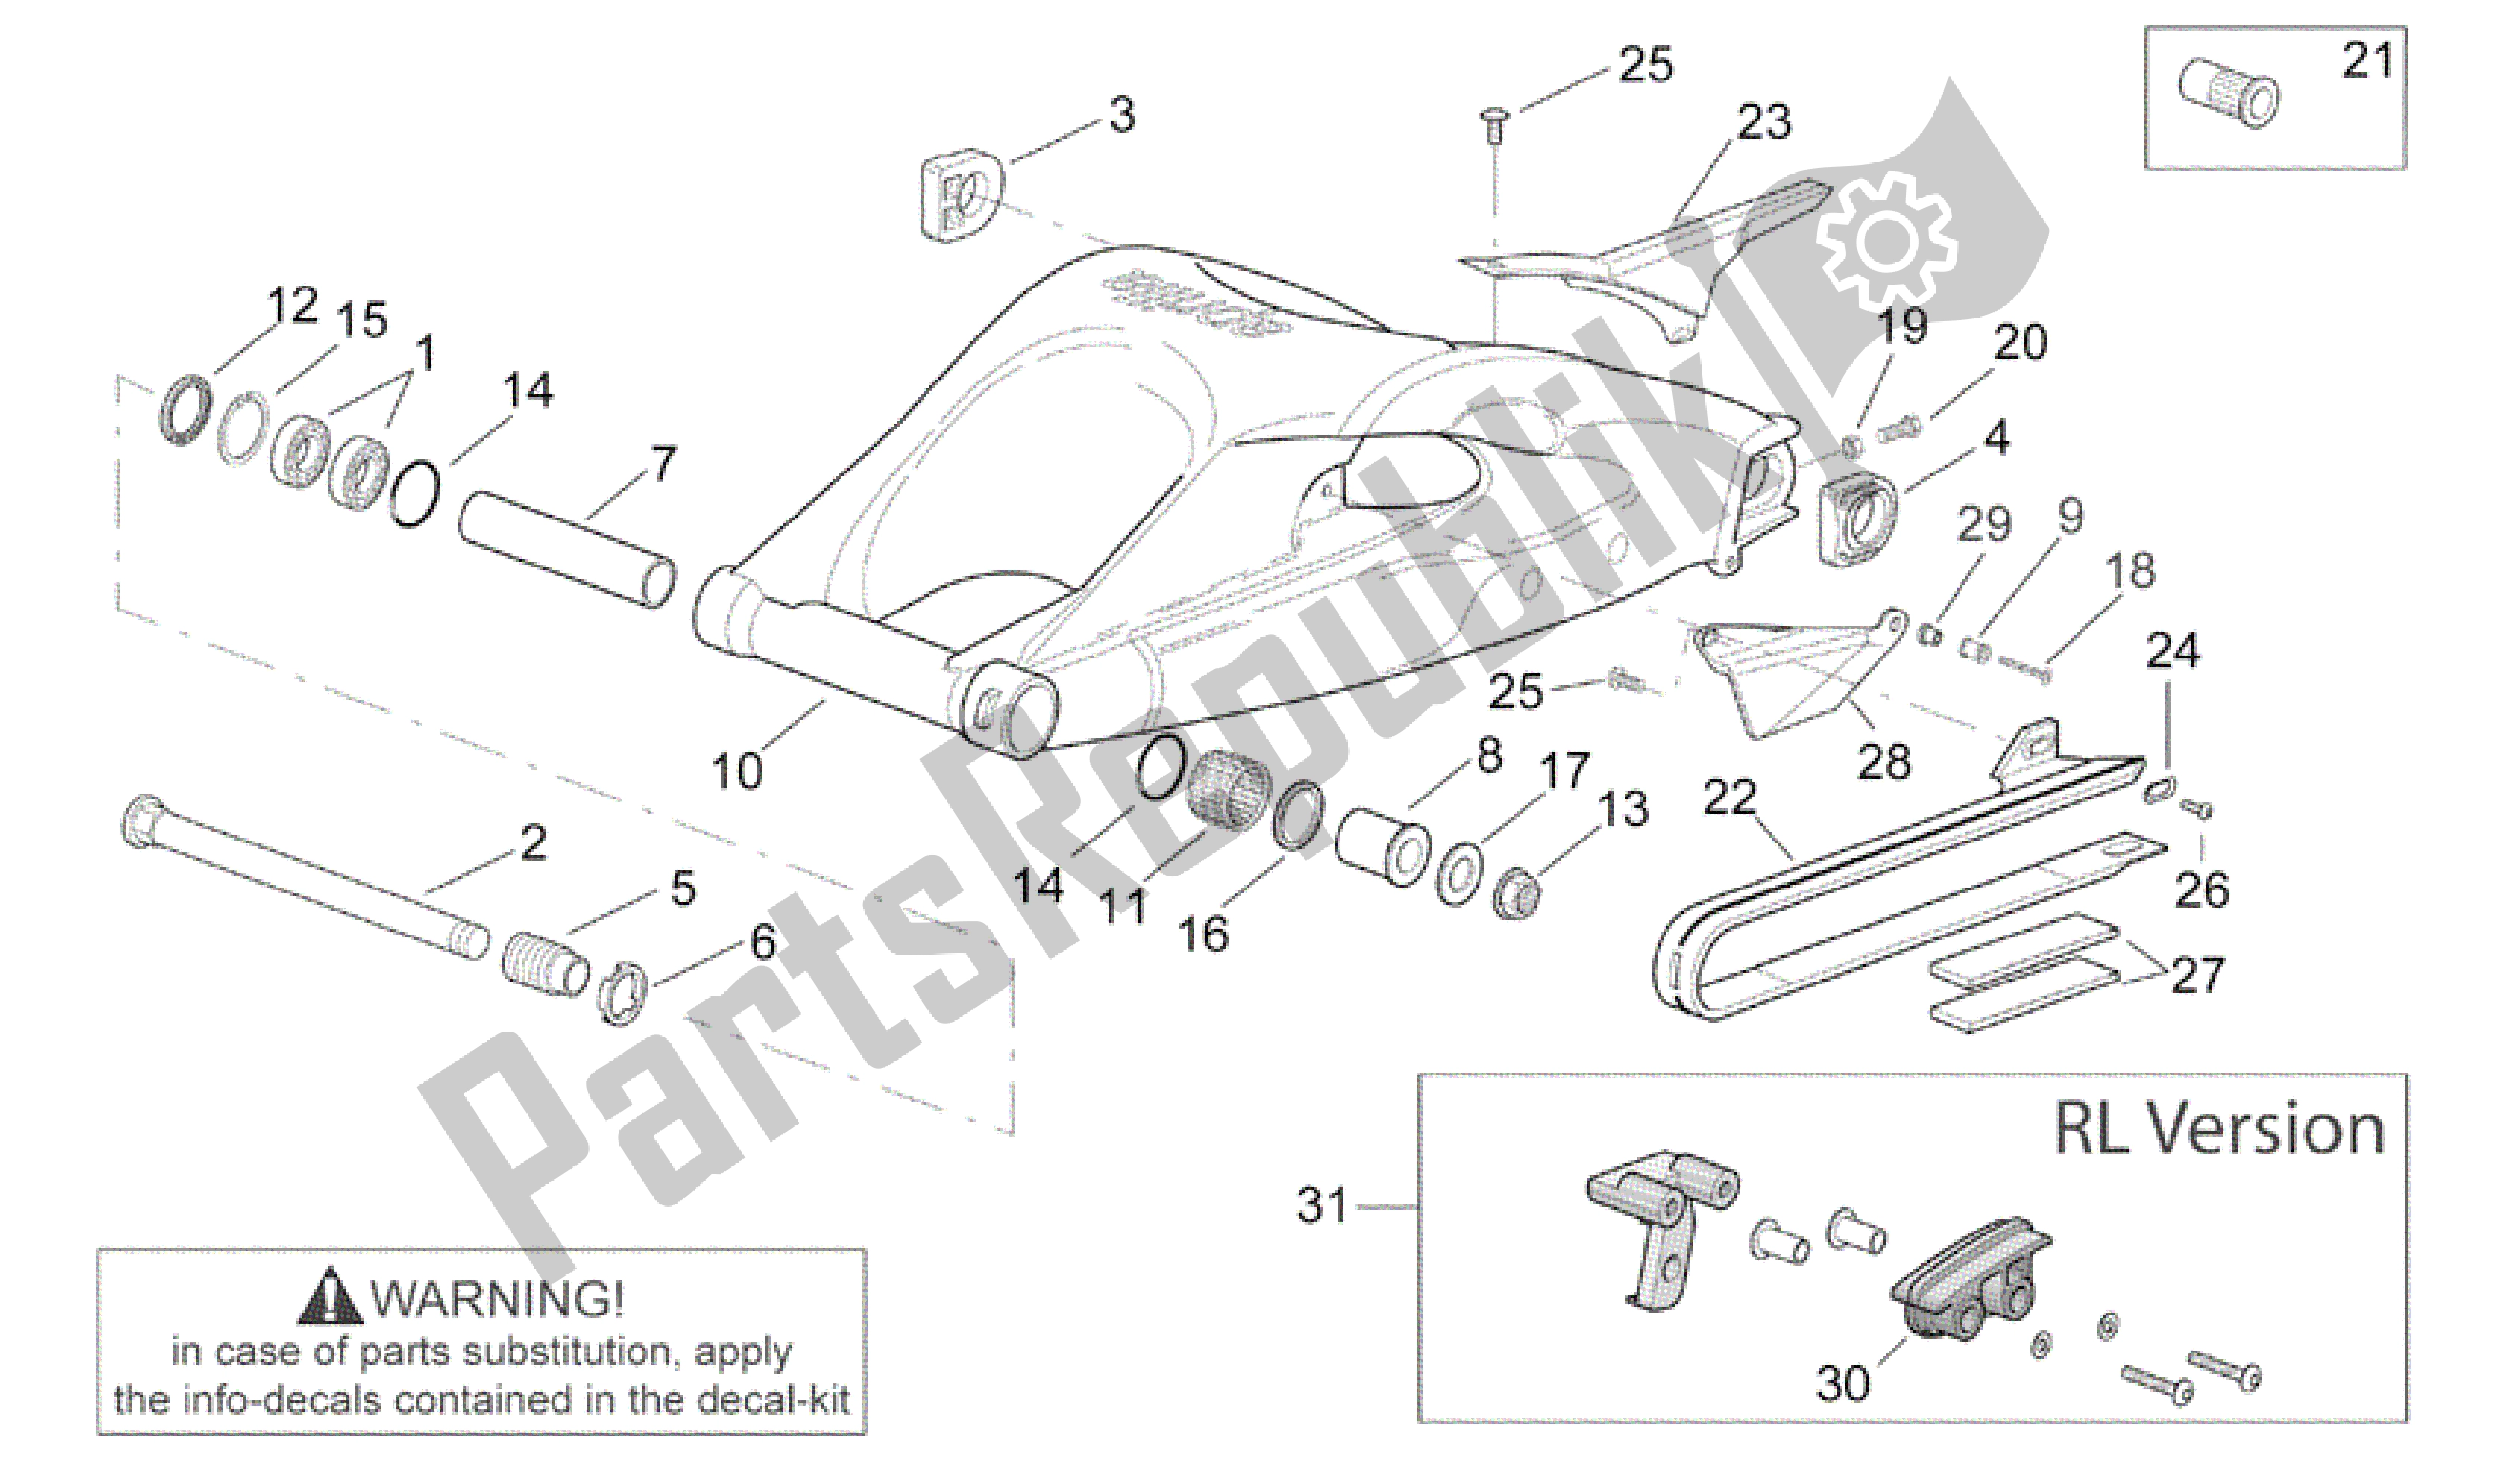 All parts for the Swing Arm of the Aprilia RSV Mille R 3963 1000 2003